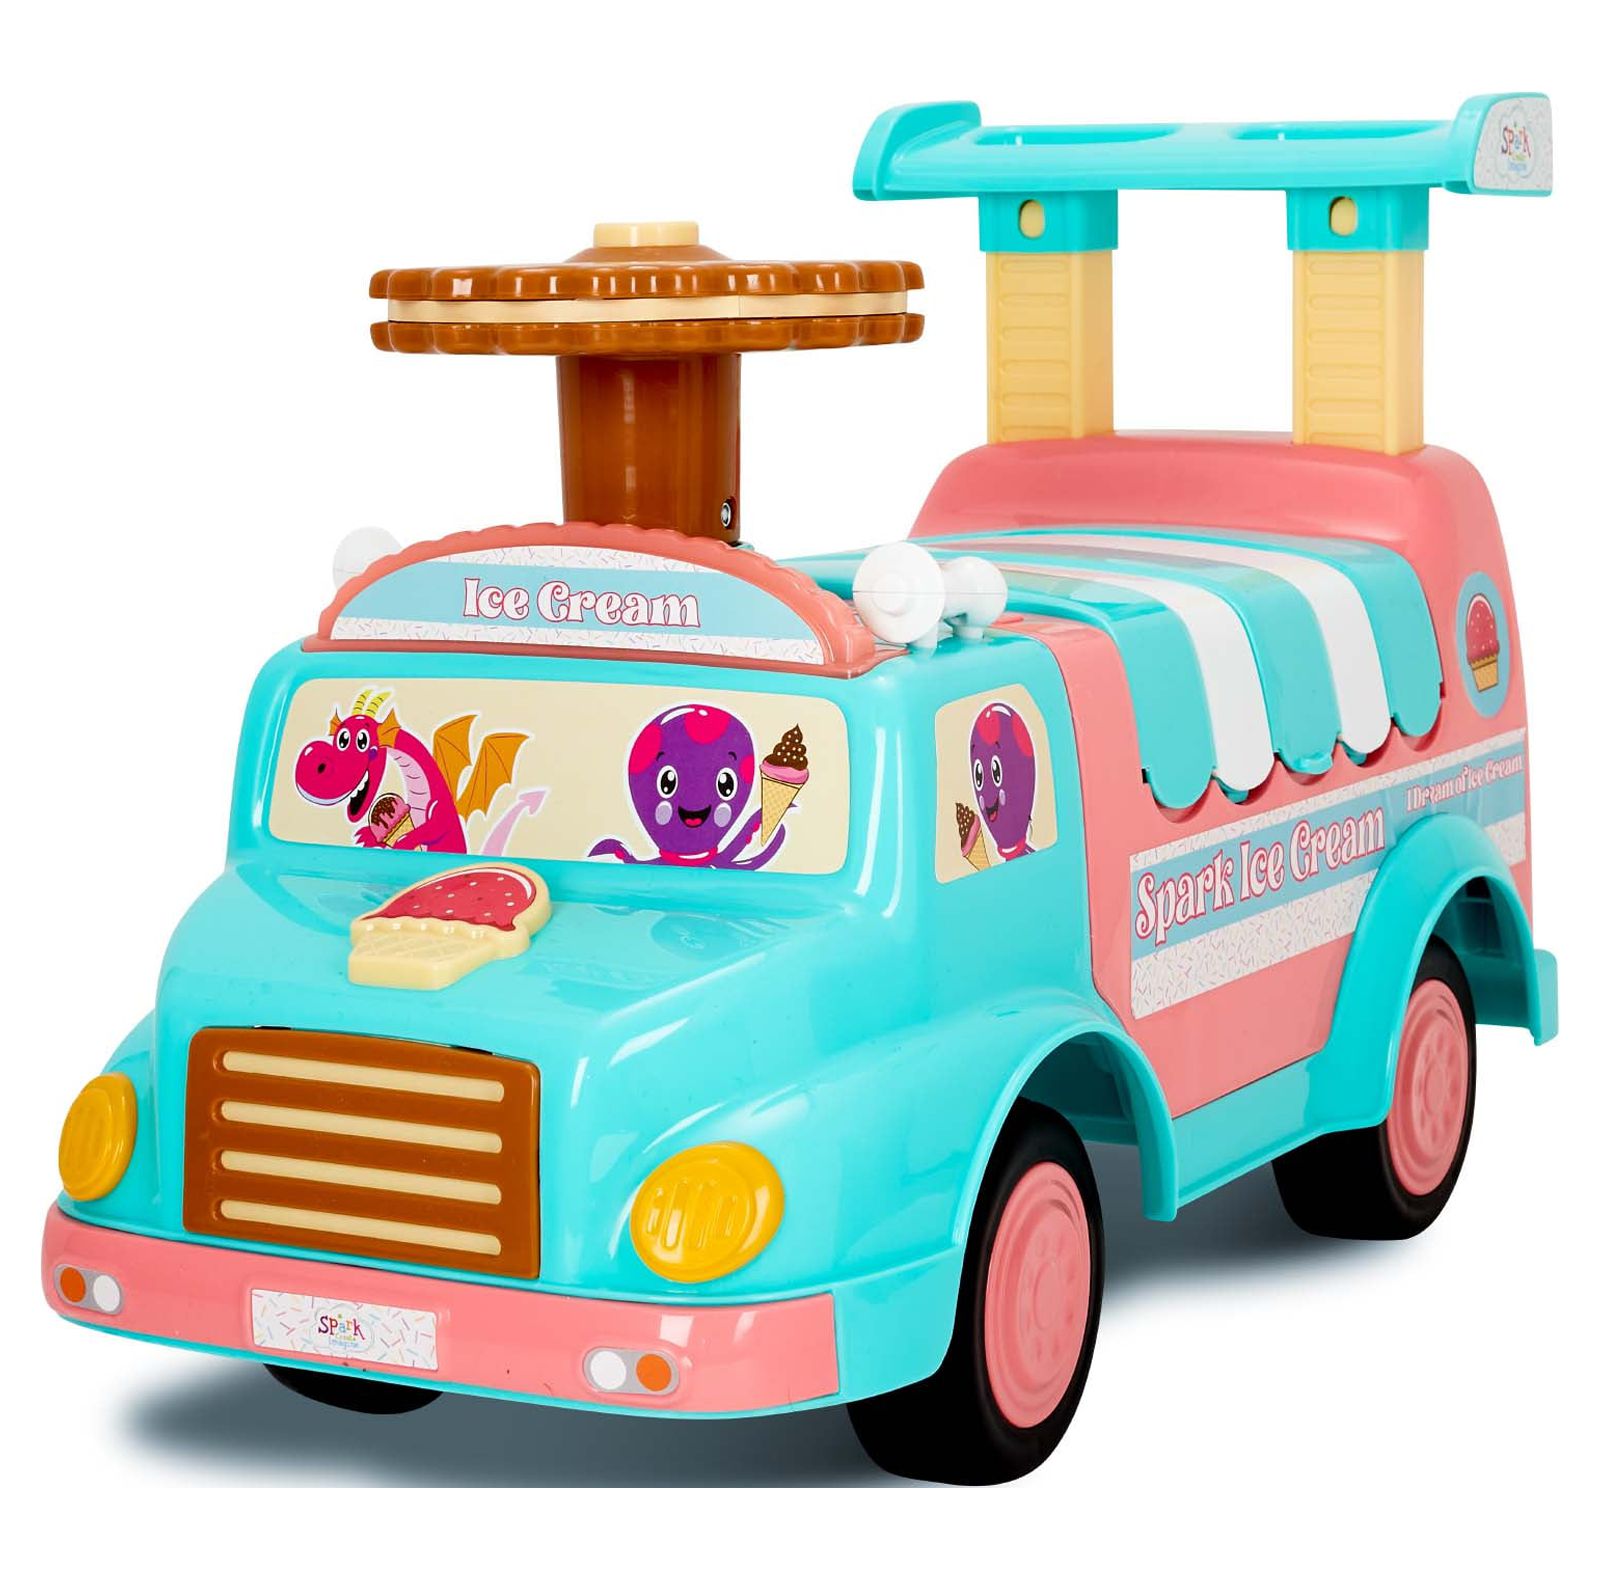 Spark, Create, Imagine, Interactive Ice Cream Truck Push Ride on Toy, Boys and Girls Ages 1-3 Years - image 1 of 18